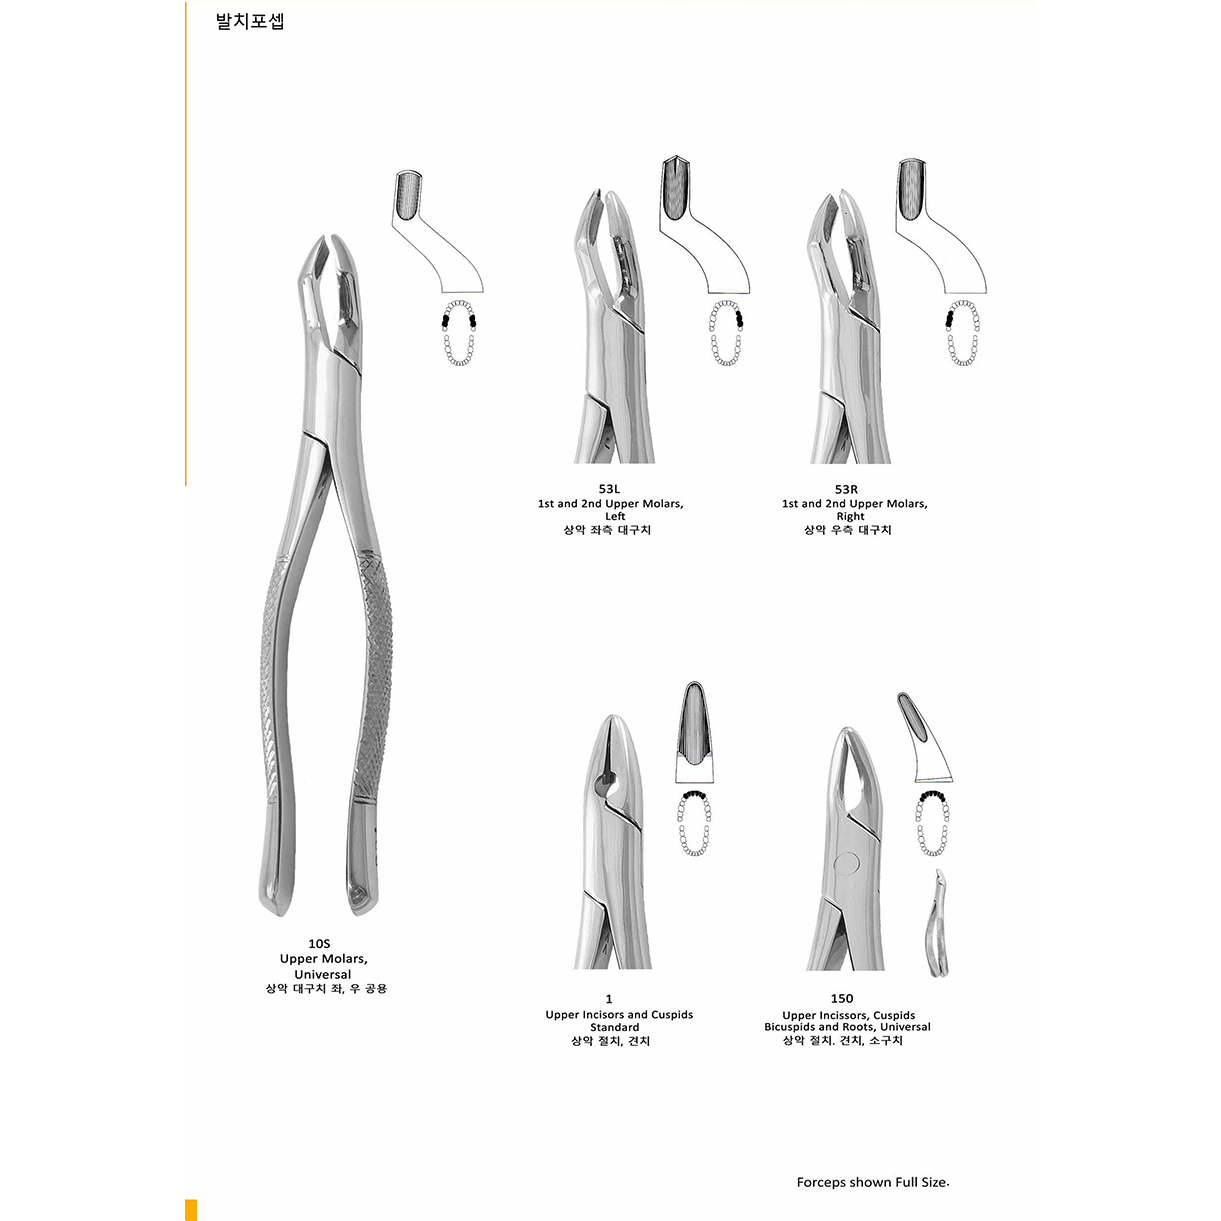 [Extracting forceps]  10S, 53L, 53R, 1, 150